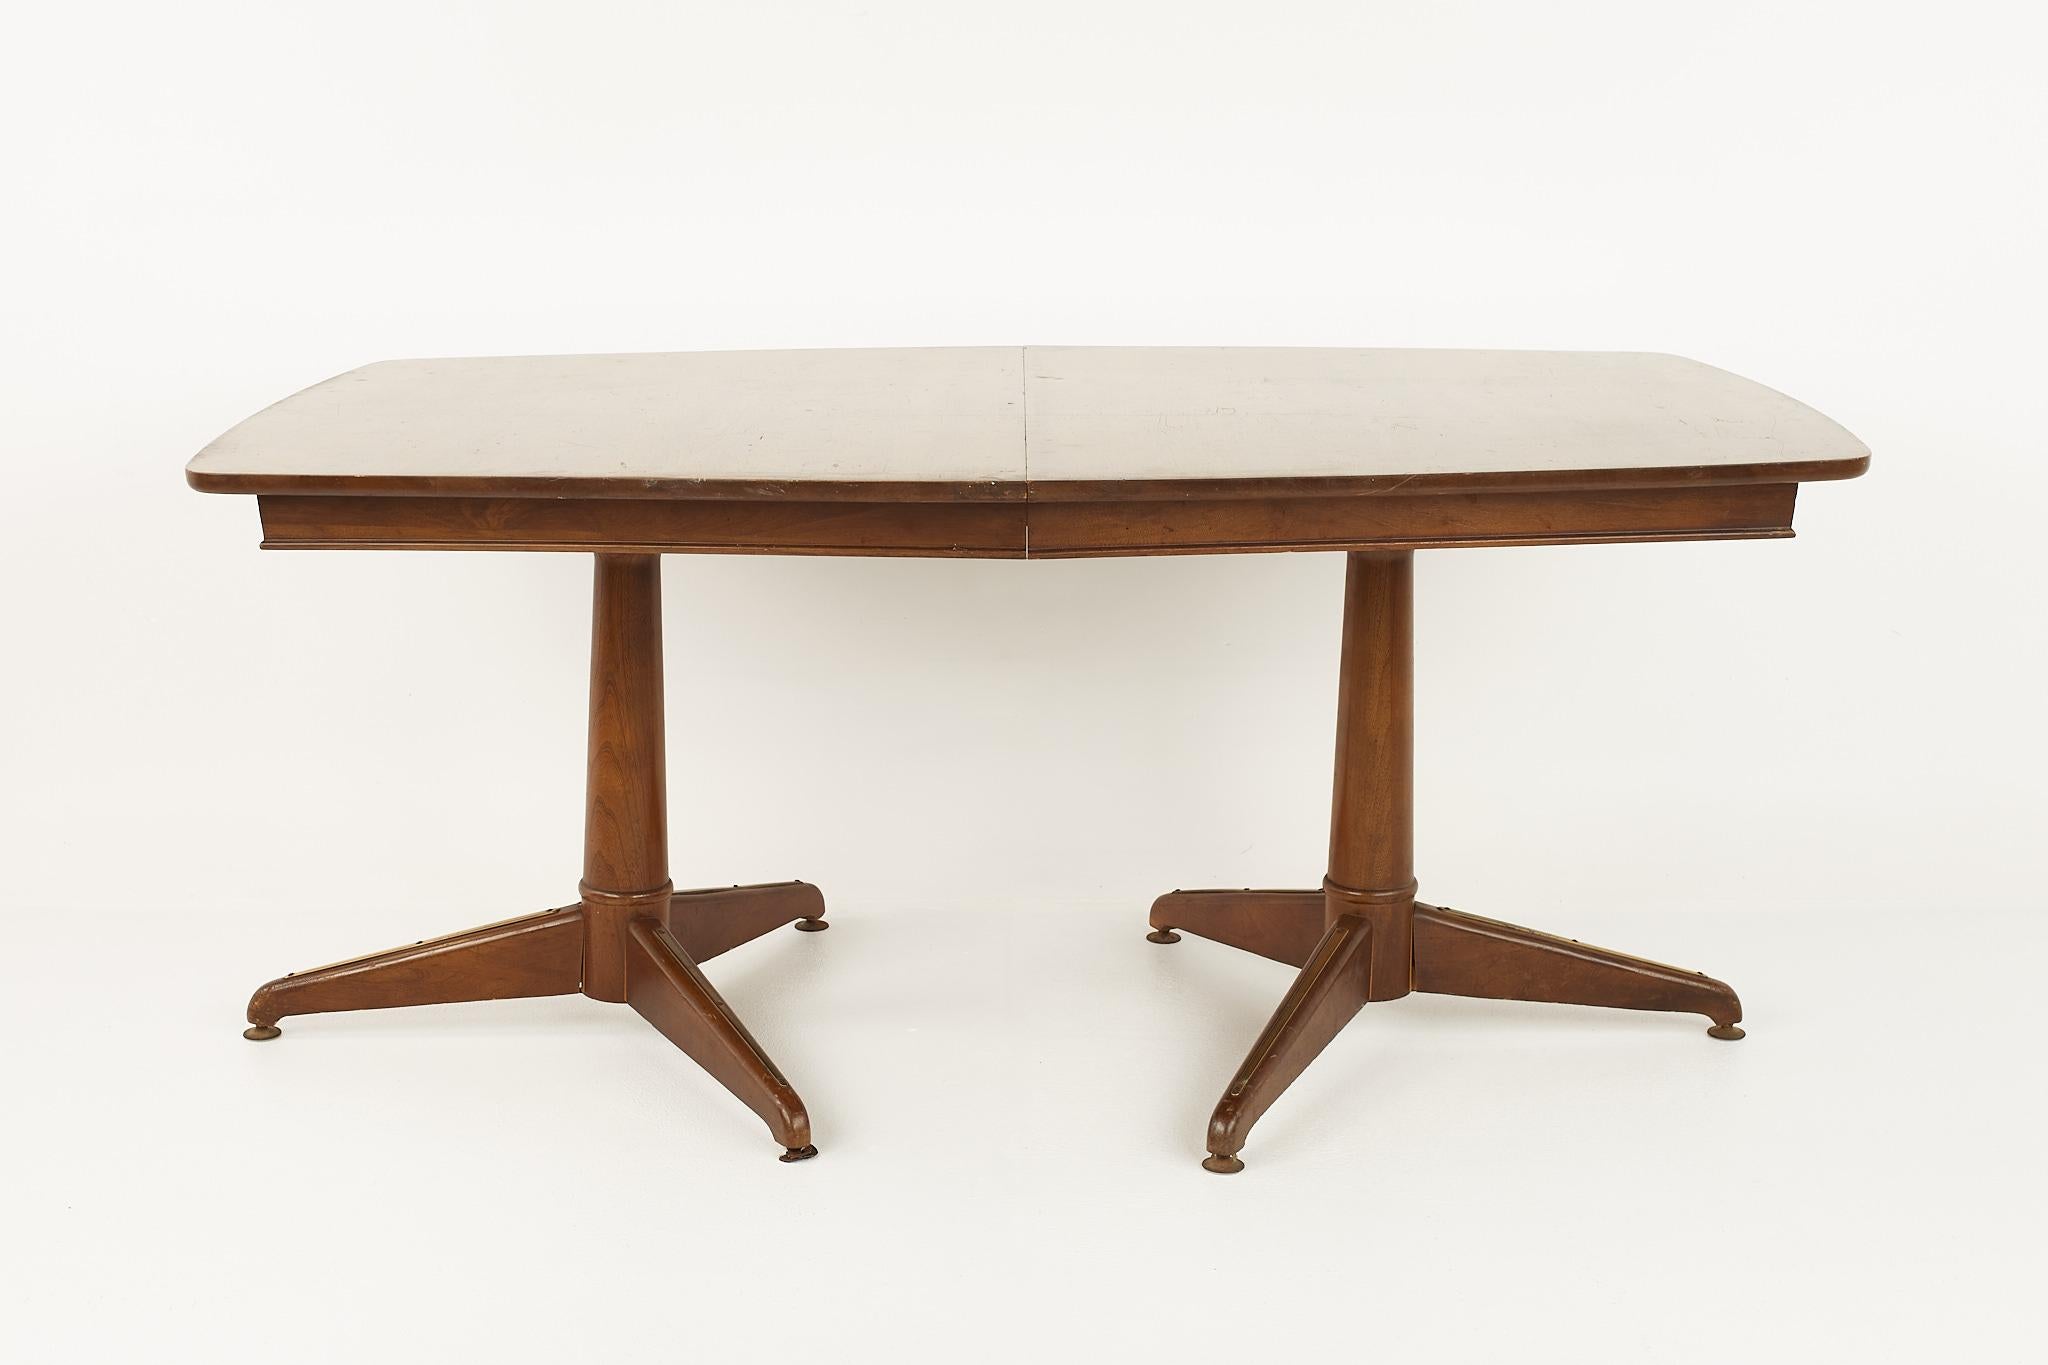 Kent Coffey mid century pedestal base 10 seat walnut dining table

The table measures: 63.75 wide x 42 deep x 27.5 inches high; each leaf is 12 inches wide, making a maximum table width of 99.75 inches when all three leaves are used 

All pieces